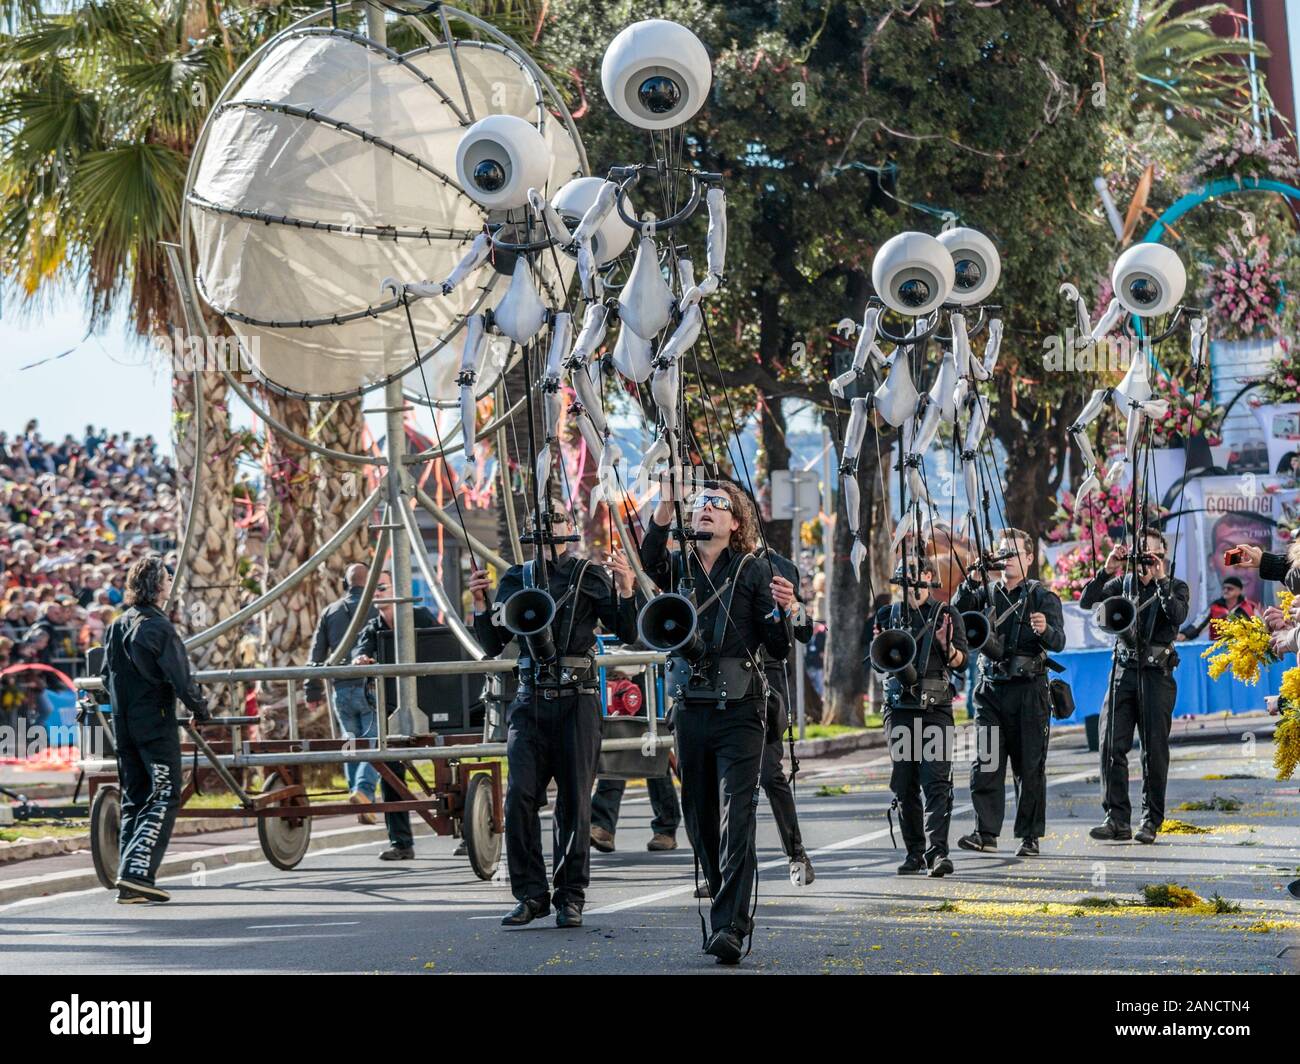 performers at the Flower Parade, Nice Carnival, French Riviera, Cote d'Azur, France. Stock Photo